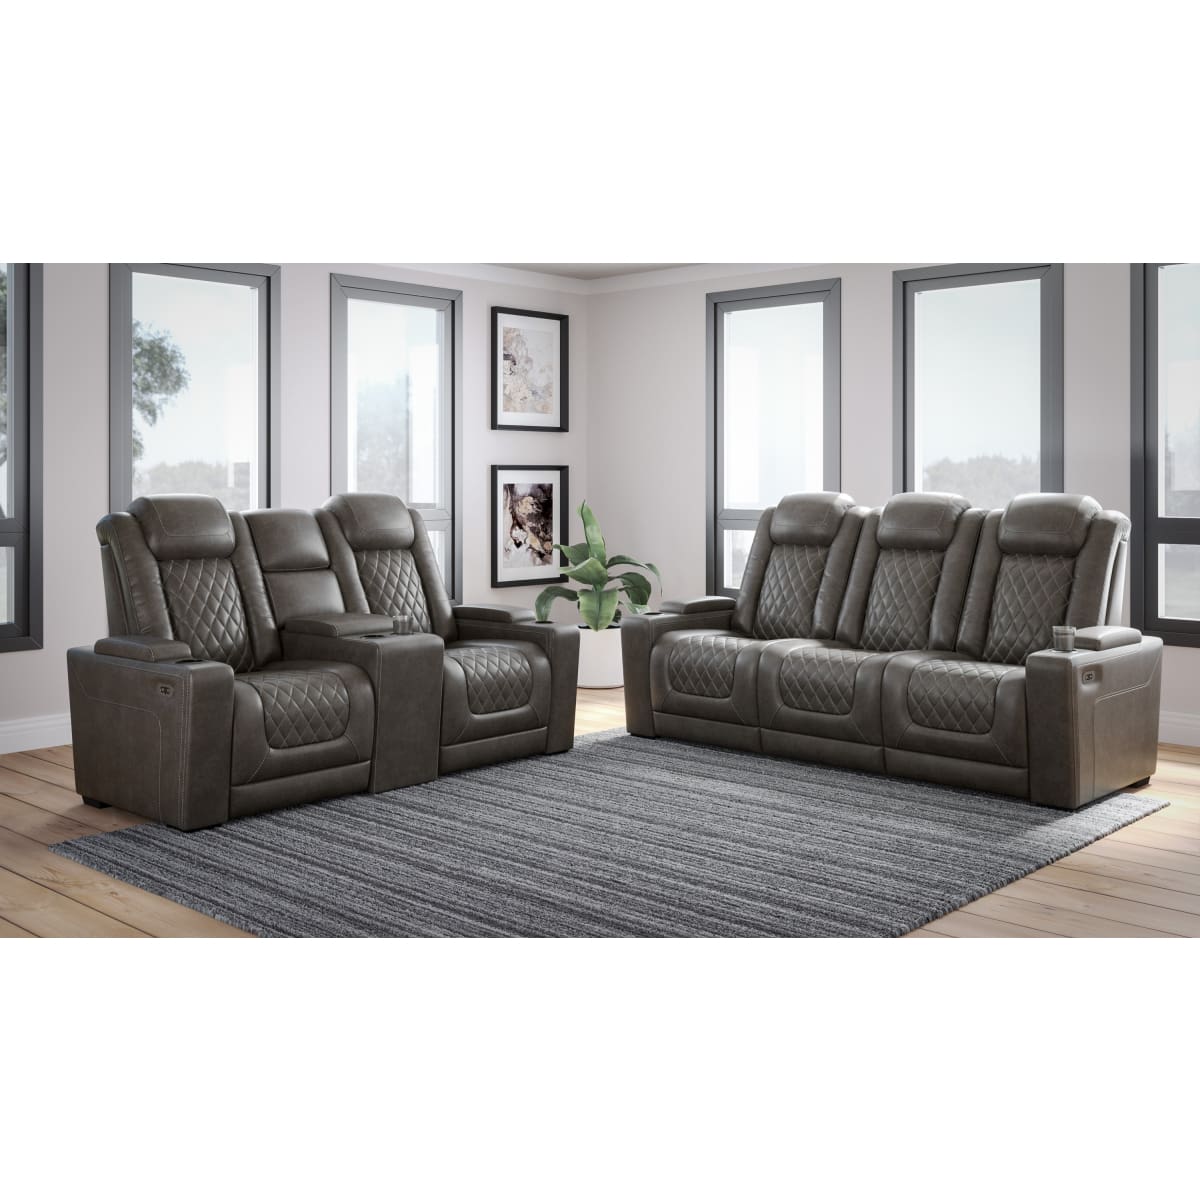 HyllMont Power Reclining Loveseat with Console - Loveseat